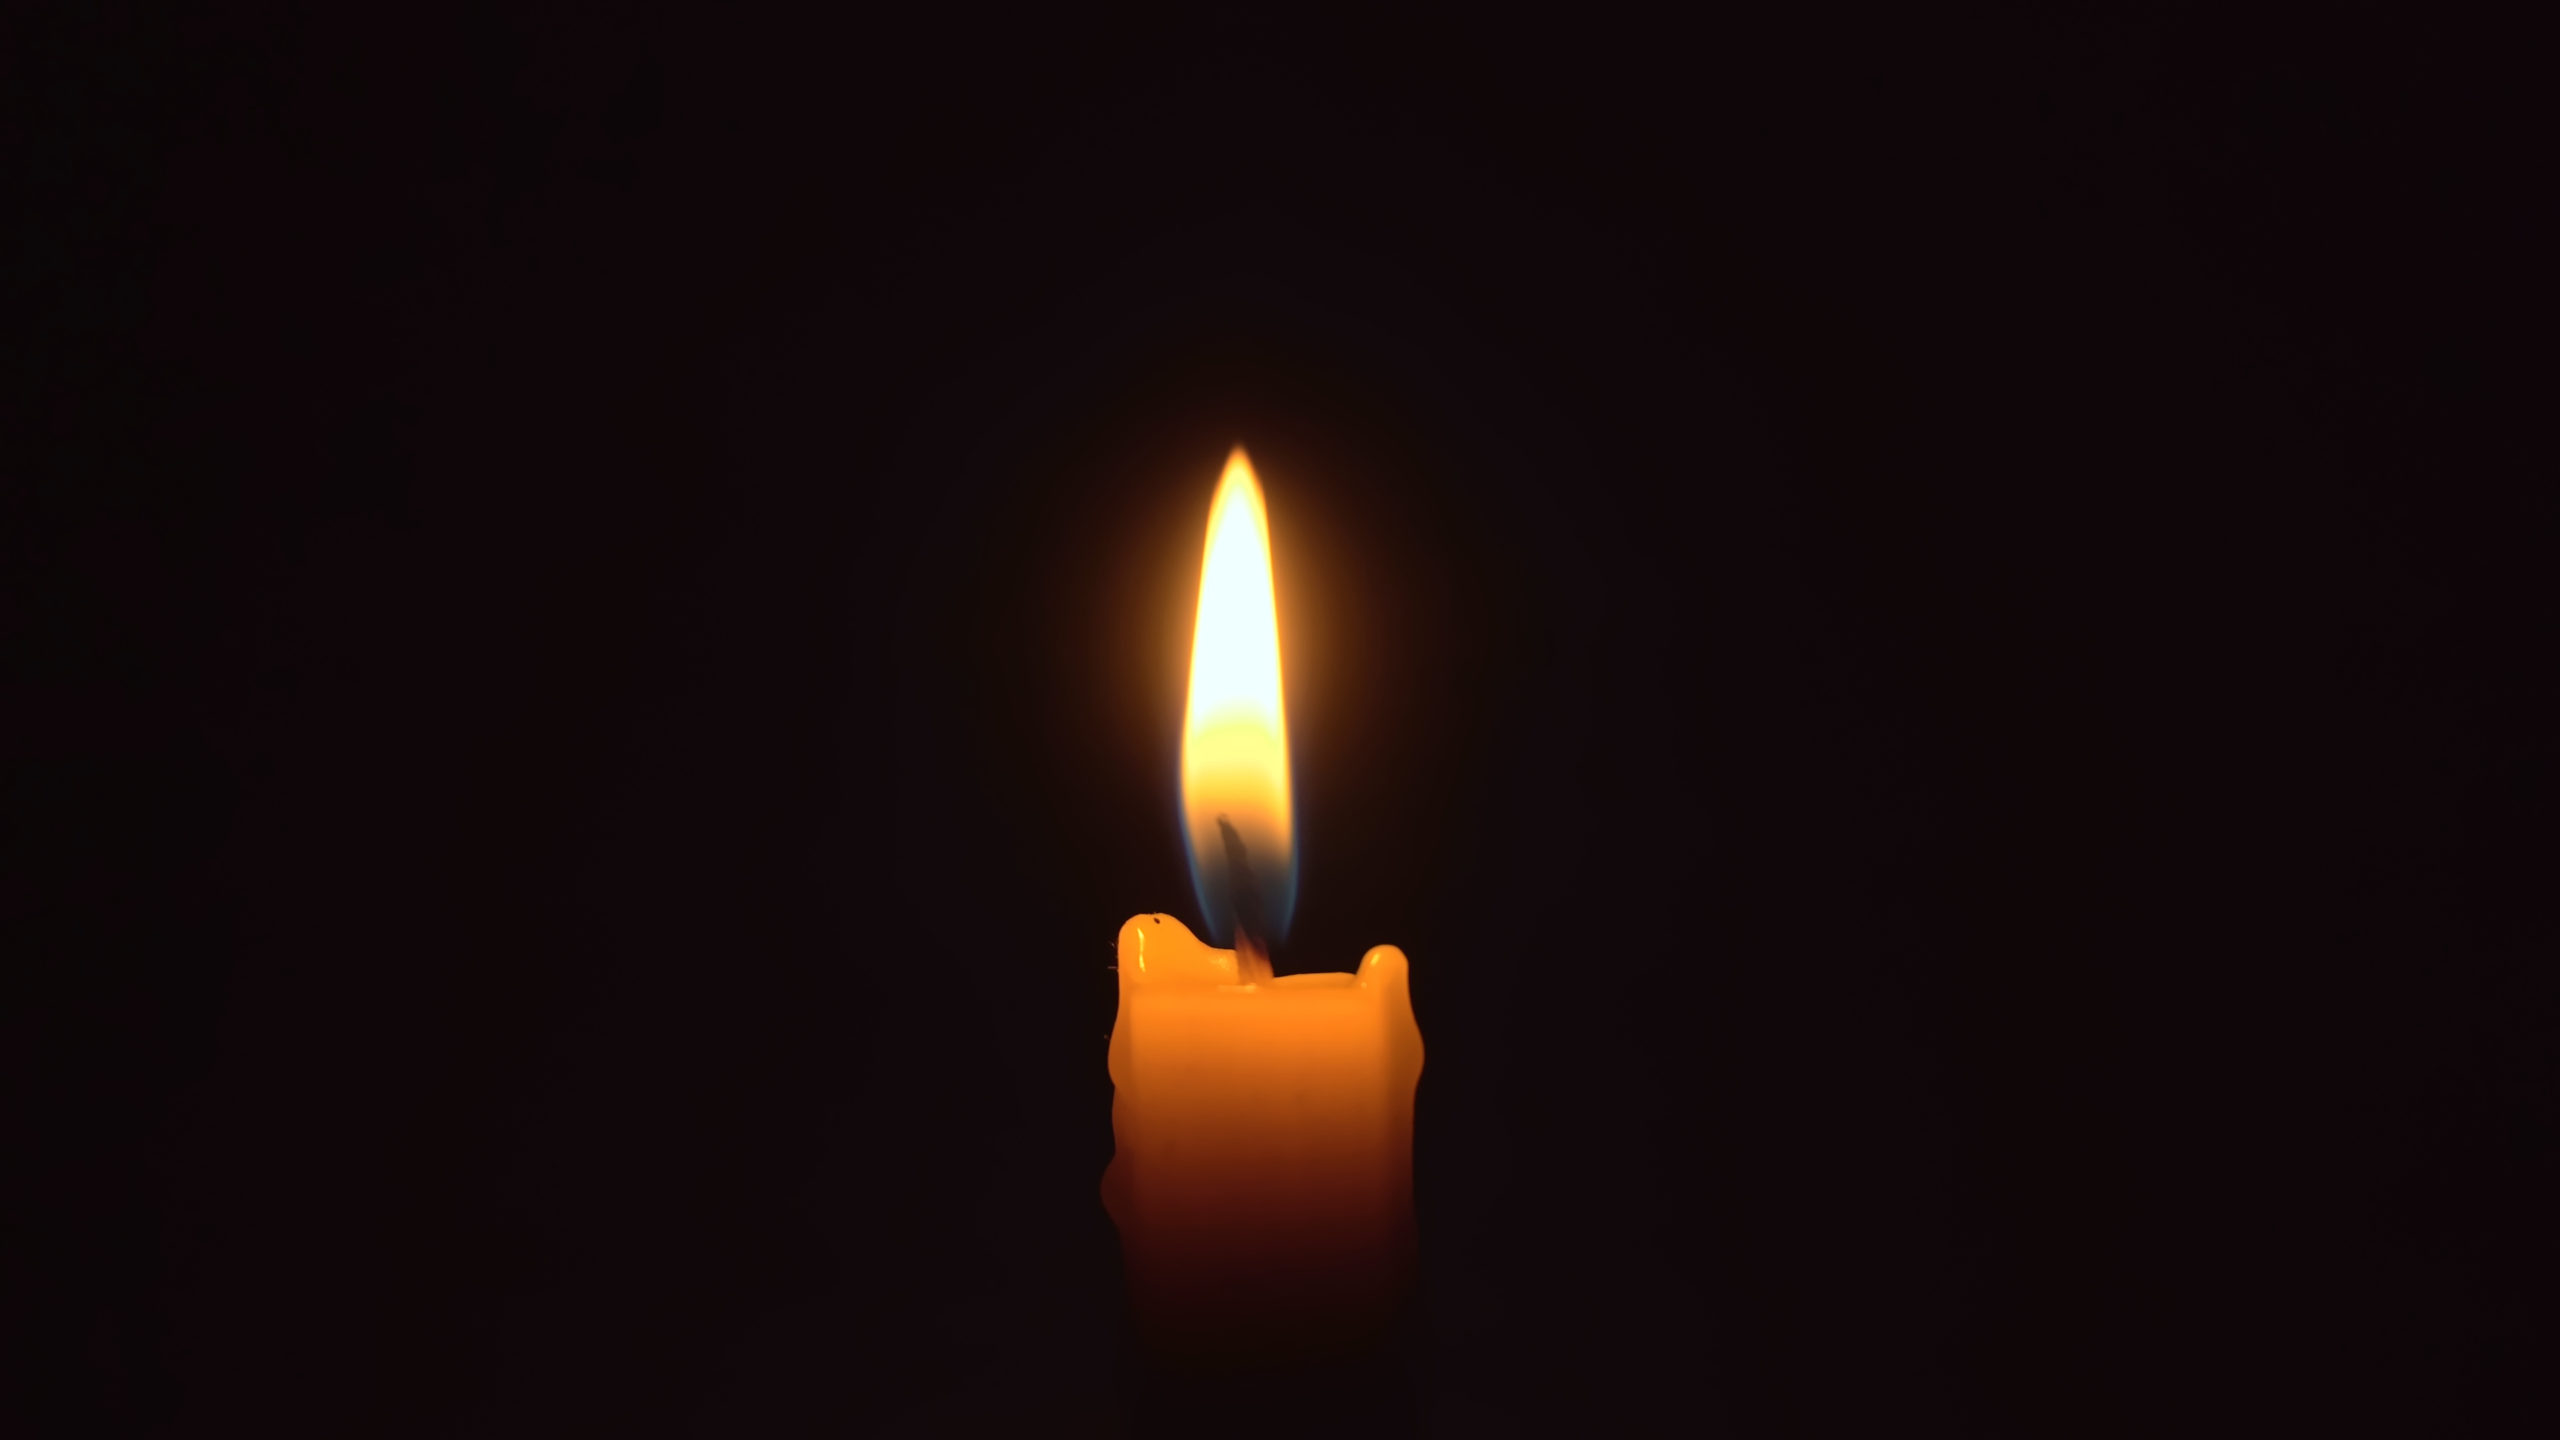 A single candle light in the darkness